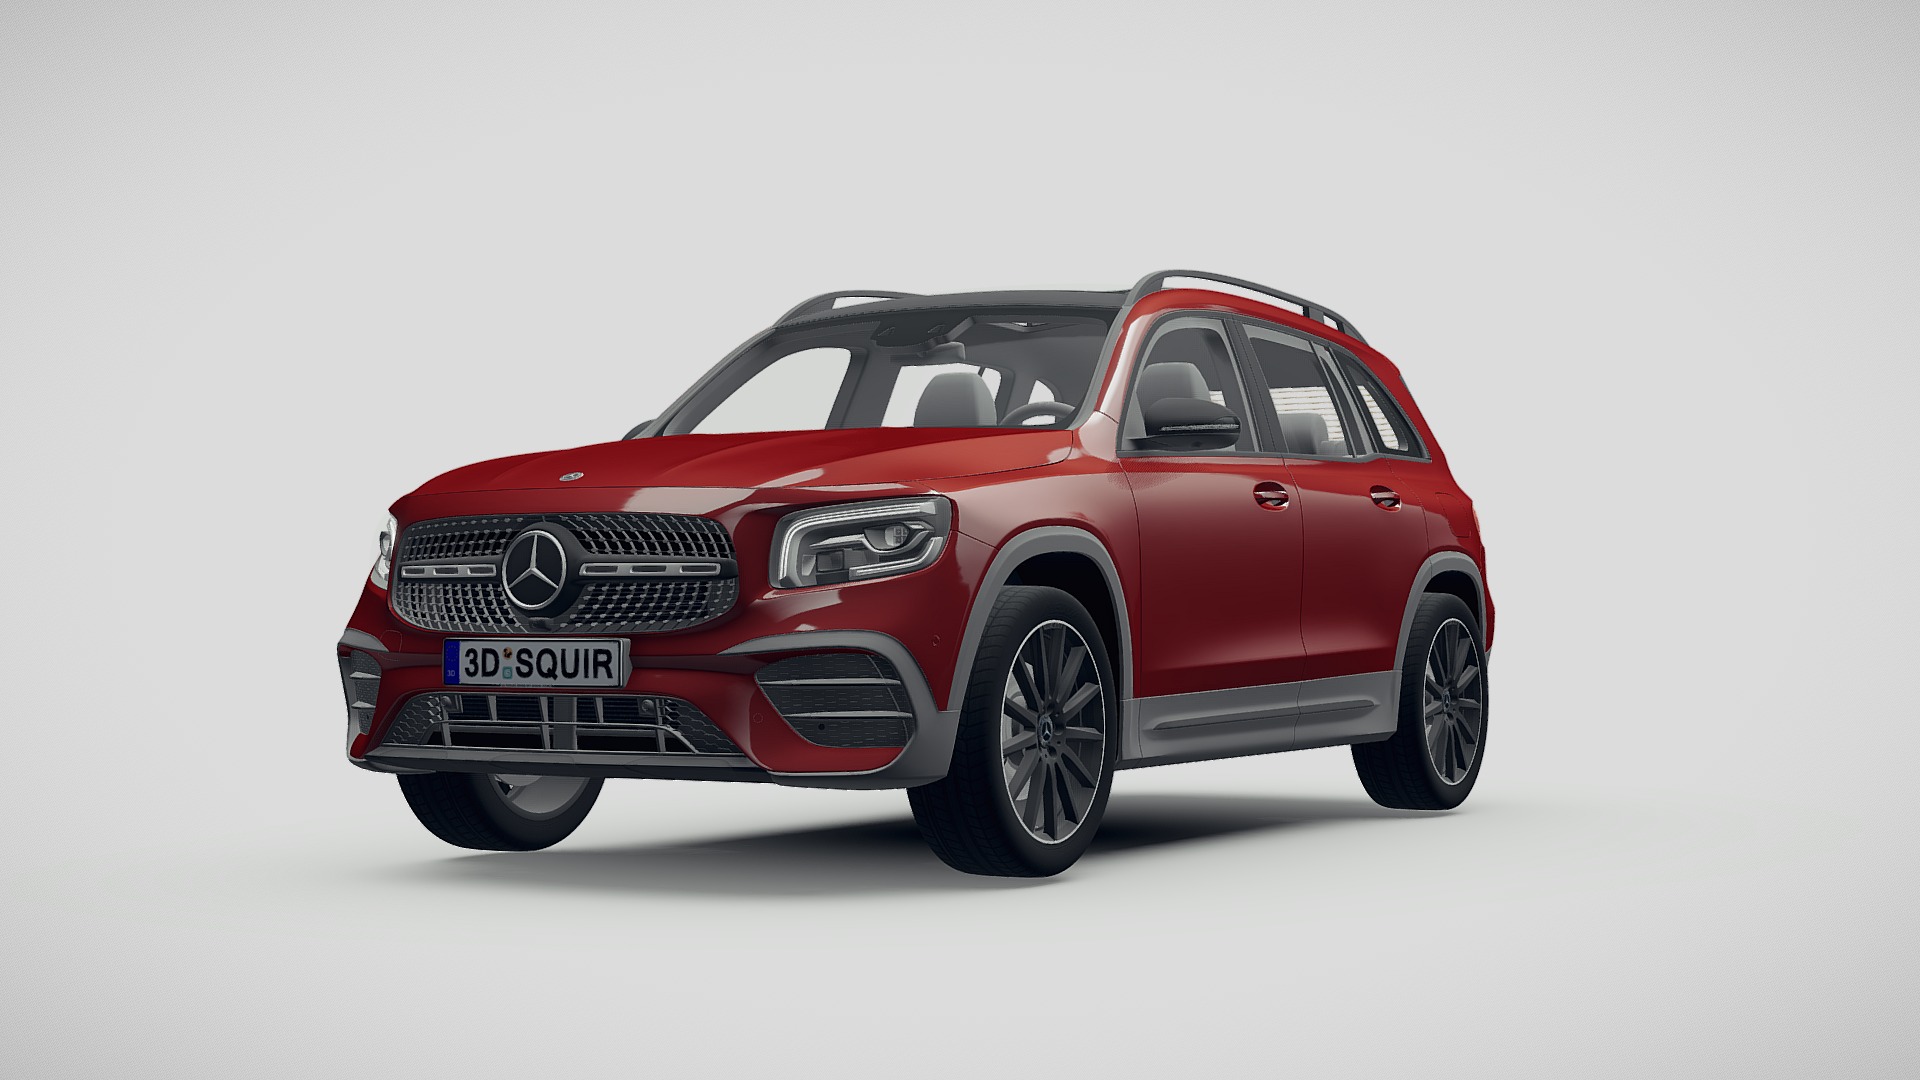 3D model Mercedes-Benz GLB AMG 2020 - This is a 3D model of the Mercedes-Benz GLB AMG 2020. The 3D model is about a red car with a white background.